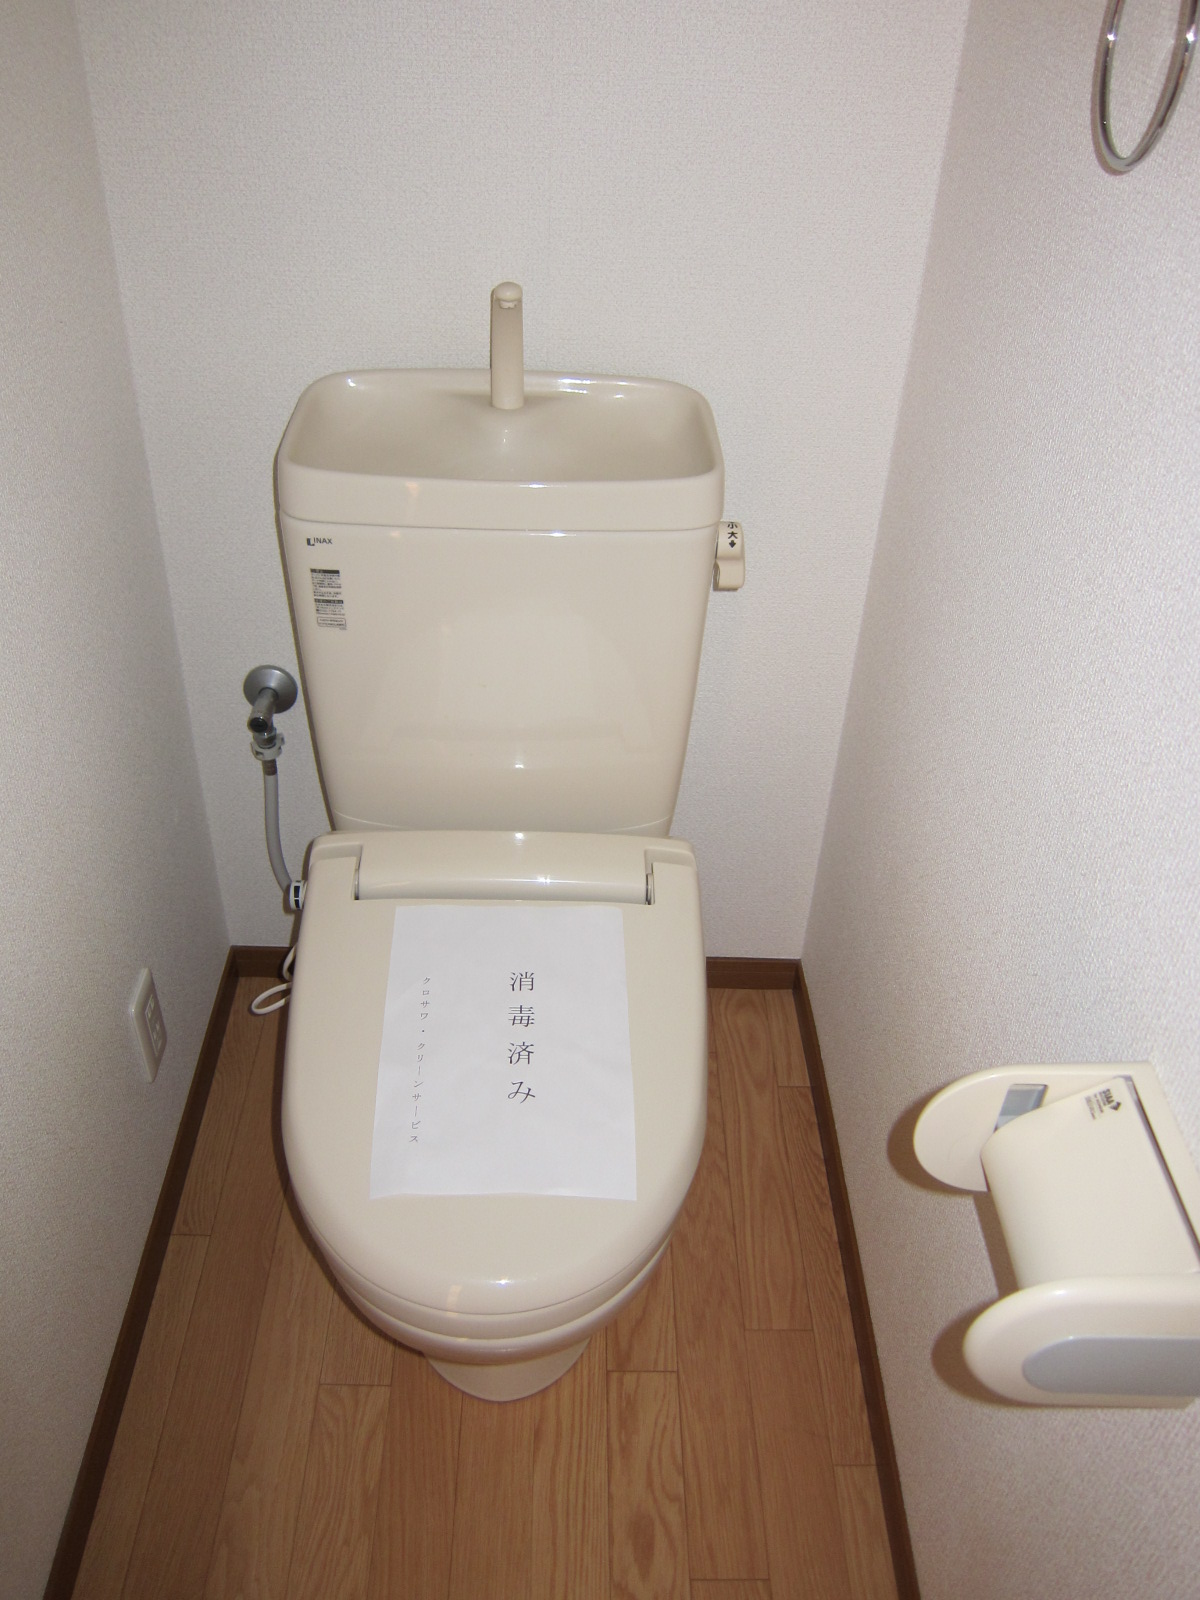 Toilet. The toilet is with over towel